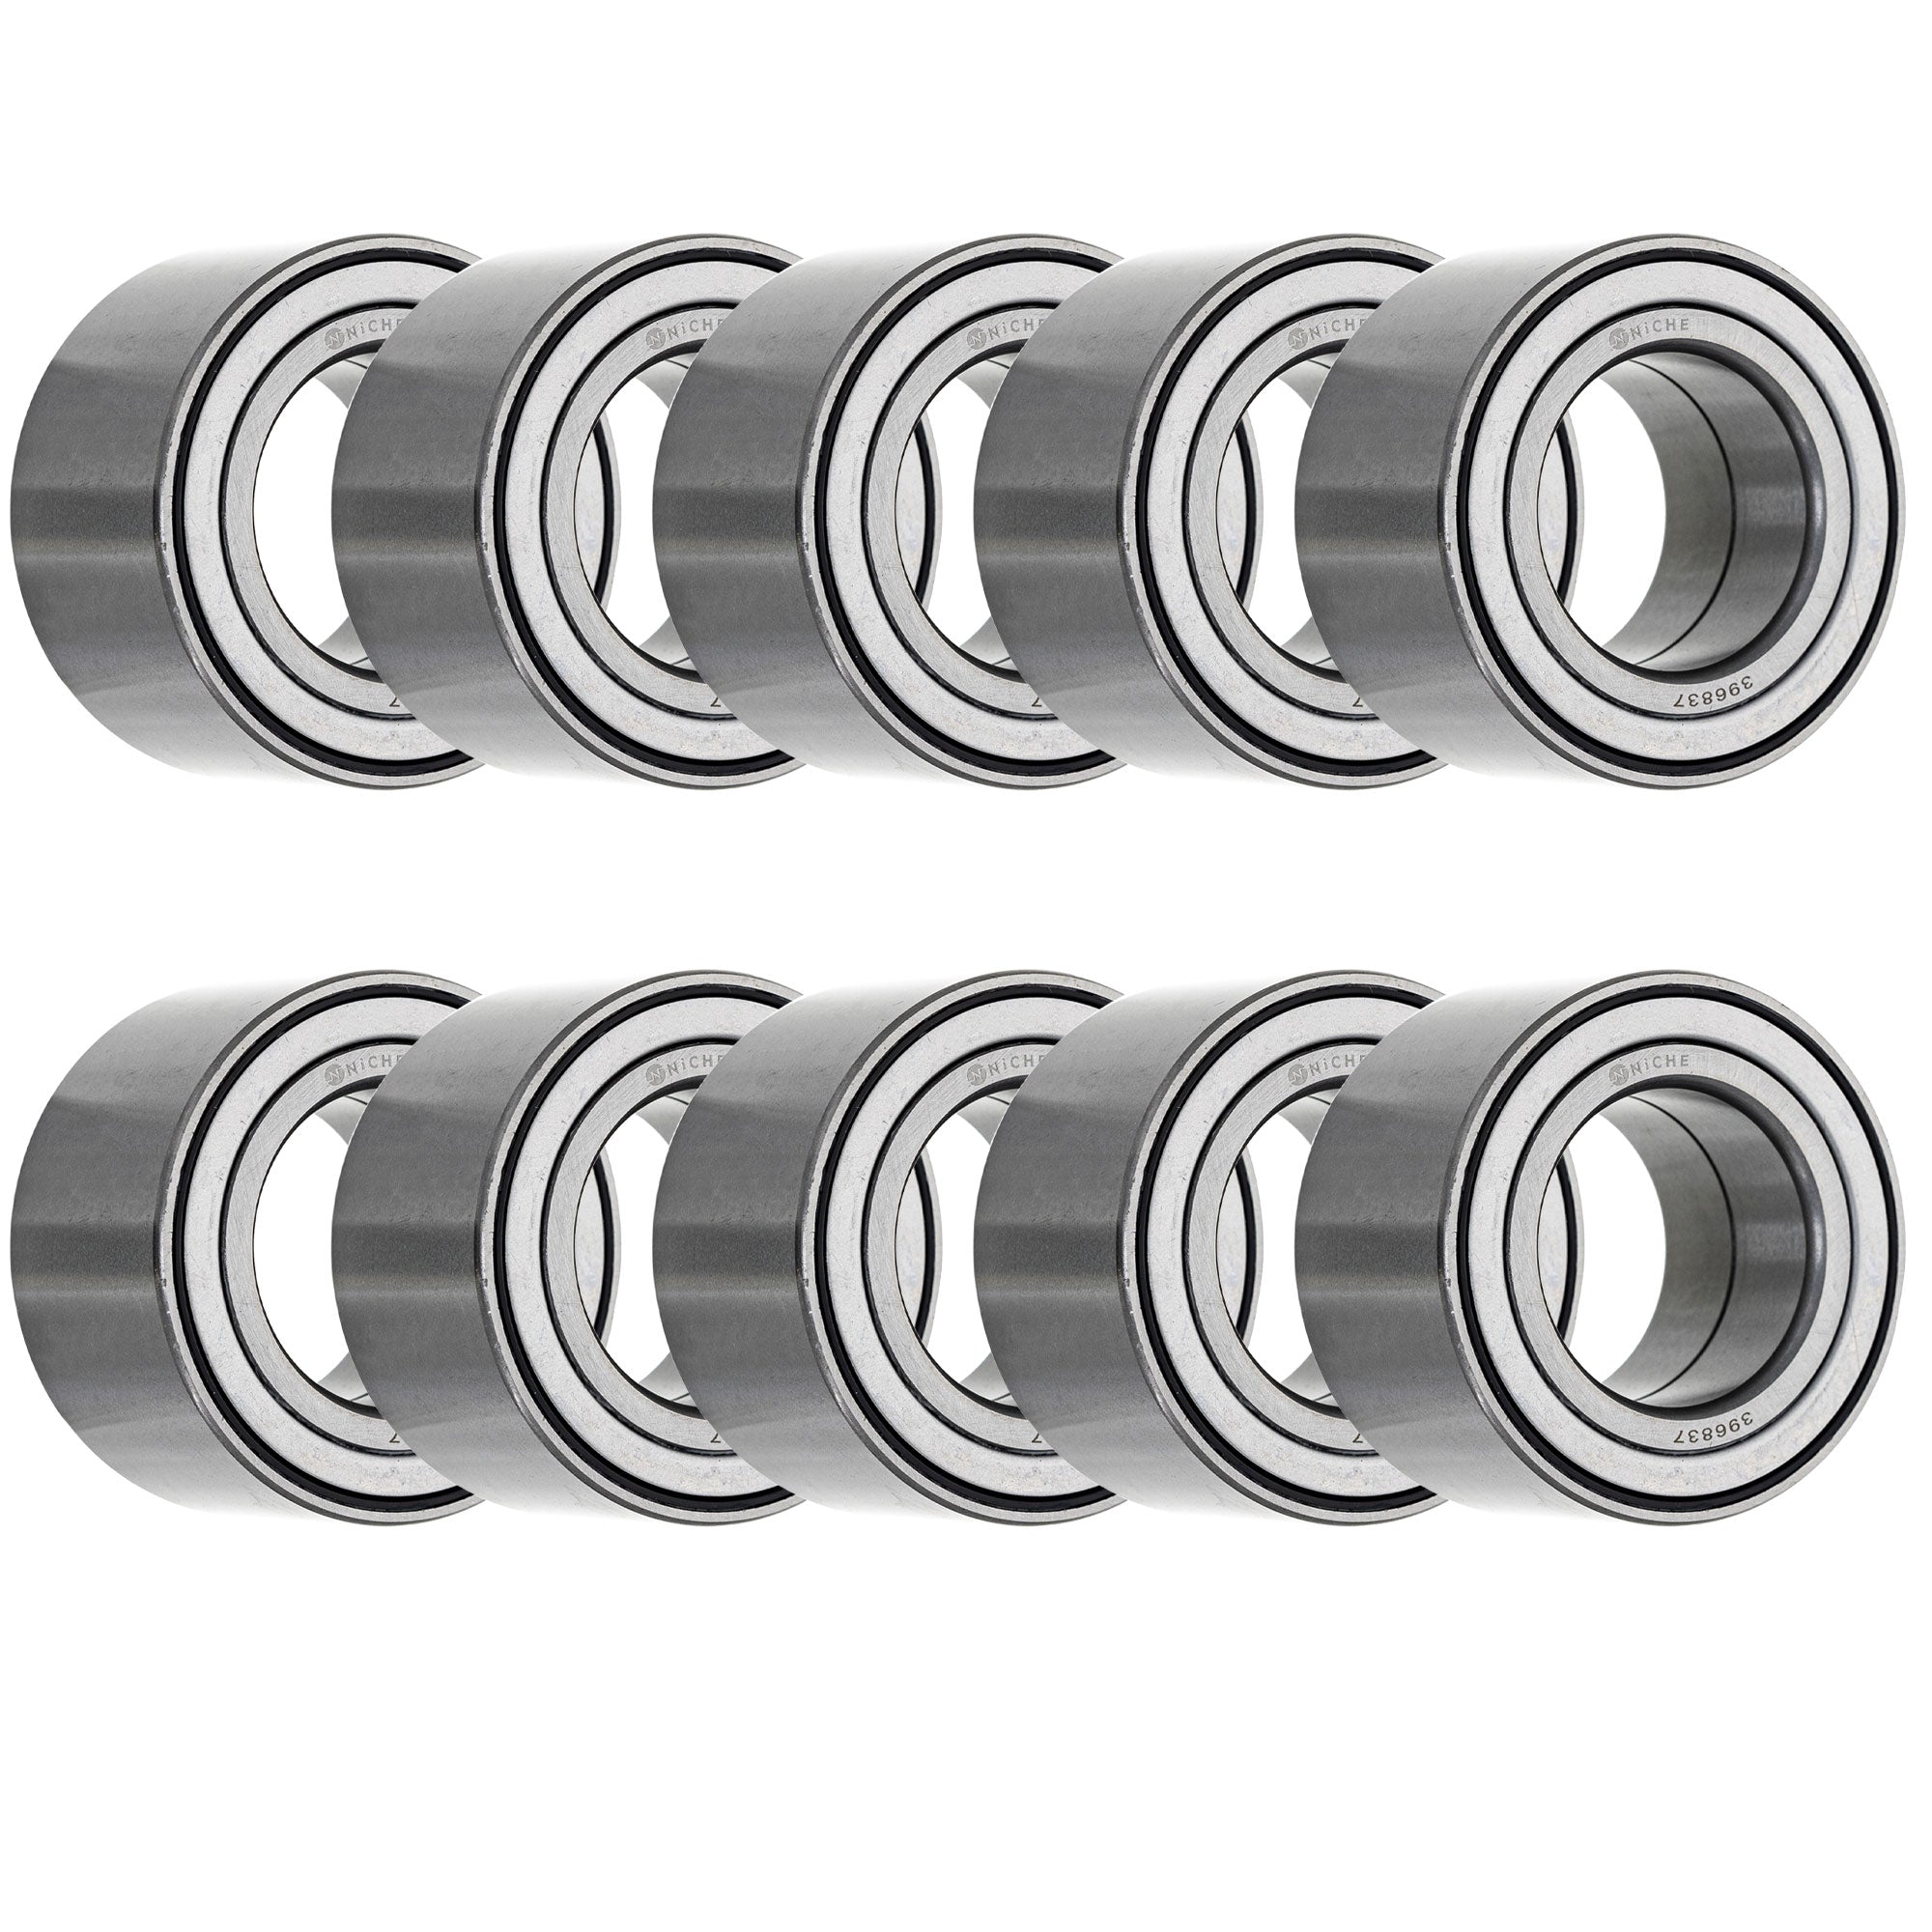 Double Row, Angular Contact, Ball Bearing Pack of 10 10-Pack for zOTHER NICHE 519-CBB2204R